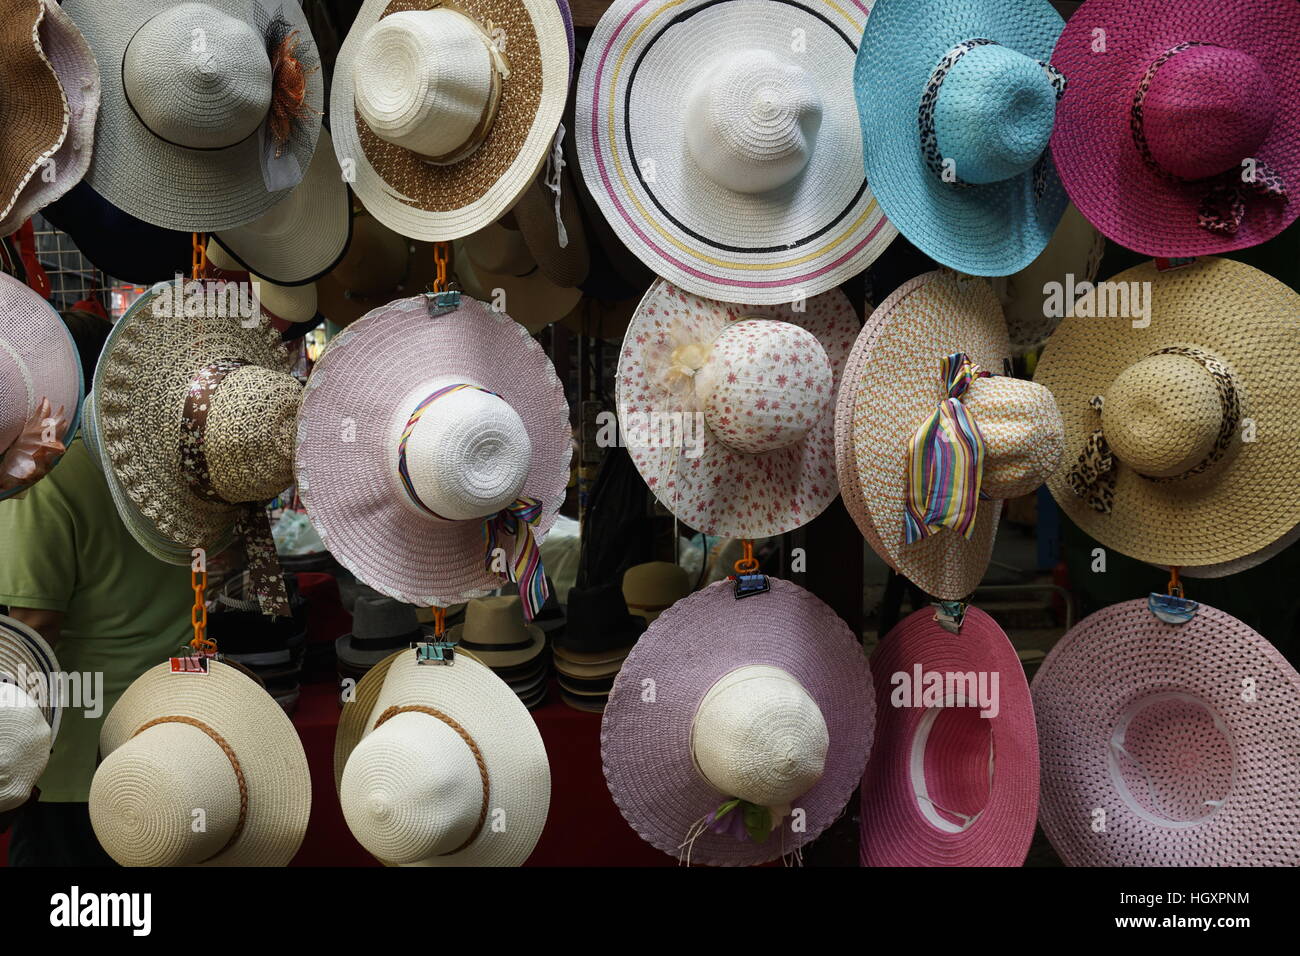 wide brimmed ladies hats Stock Photo